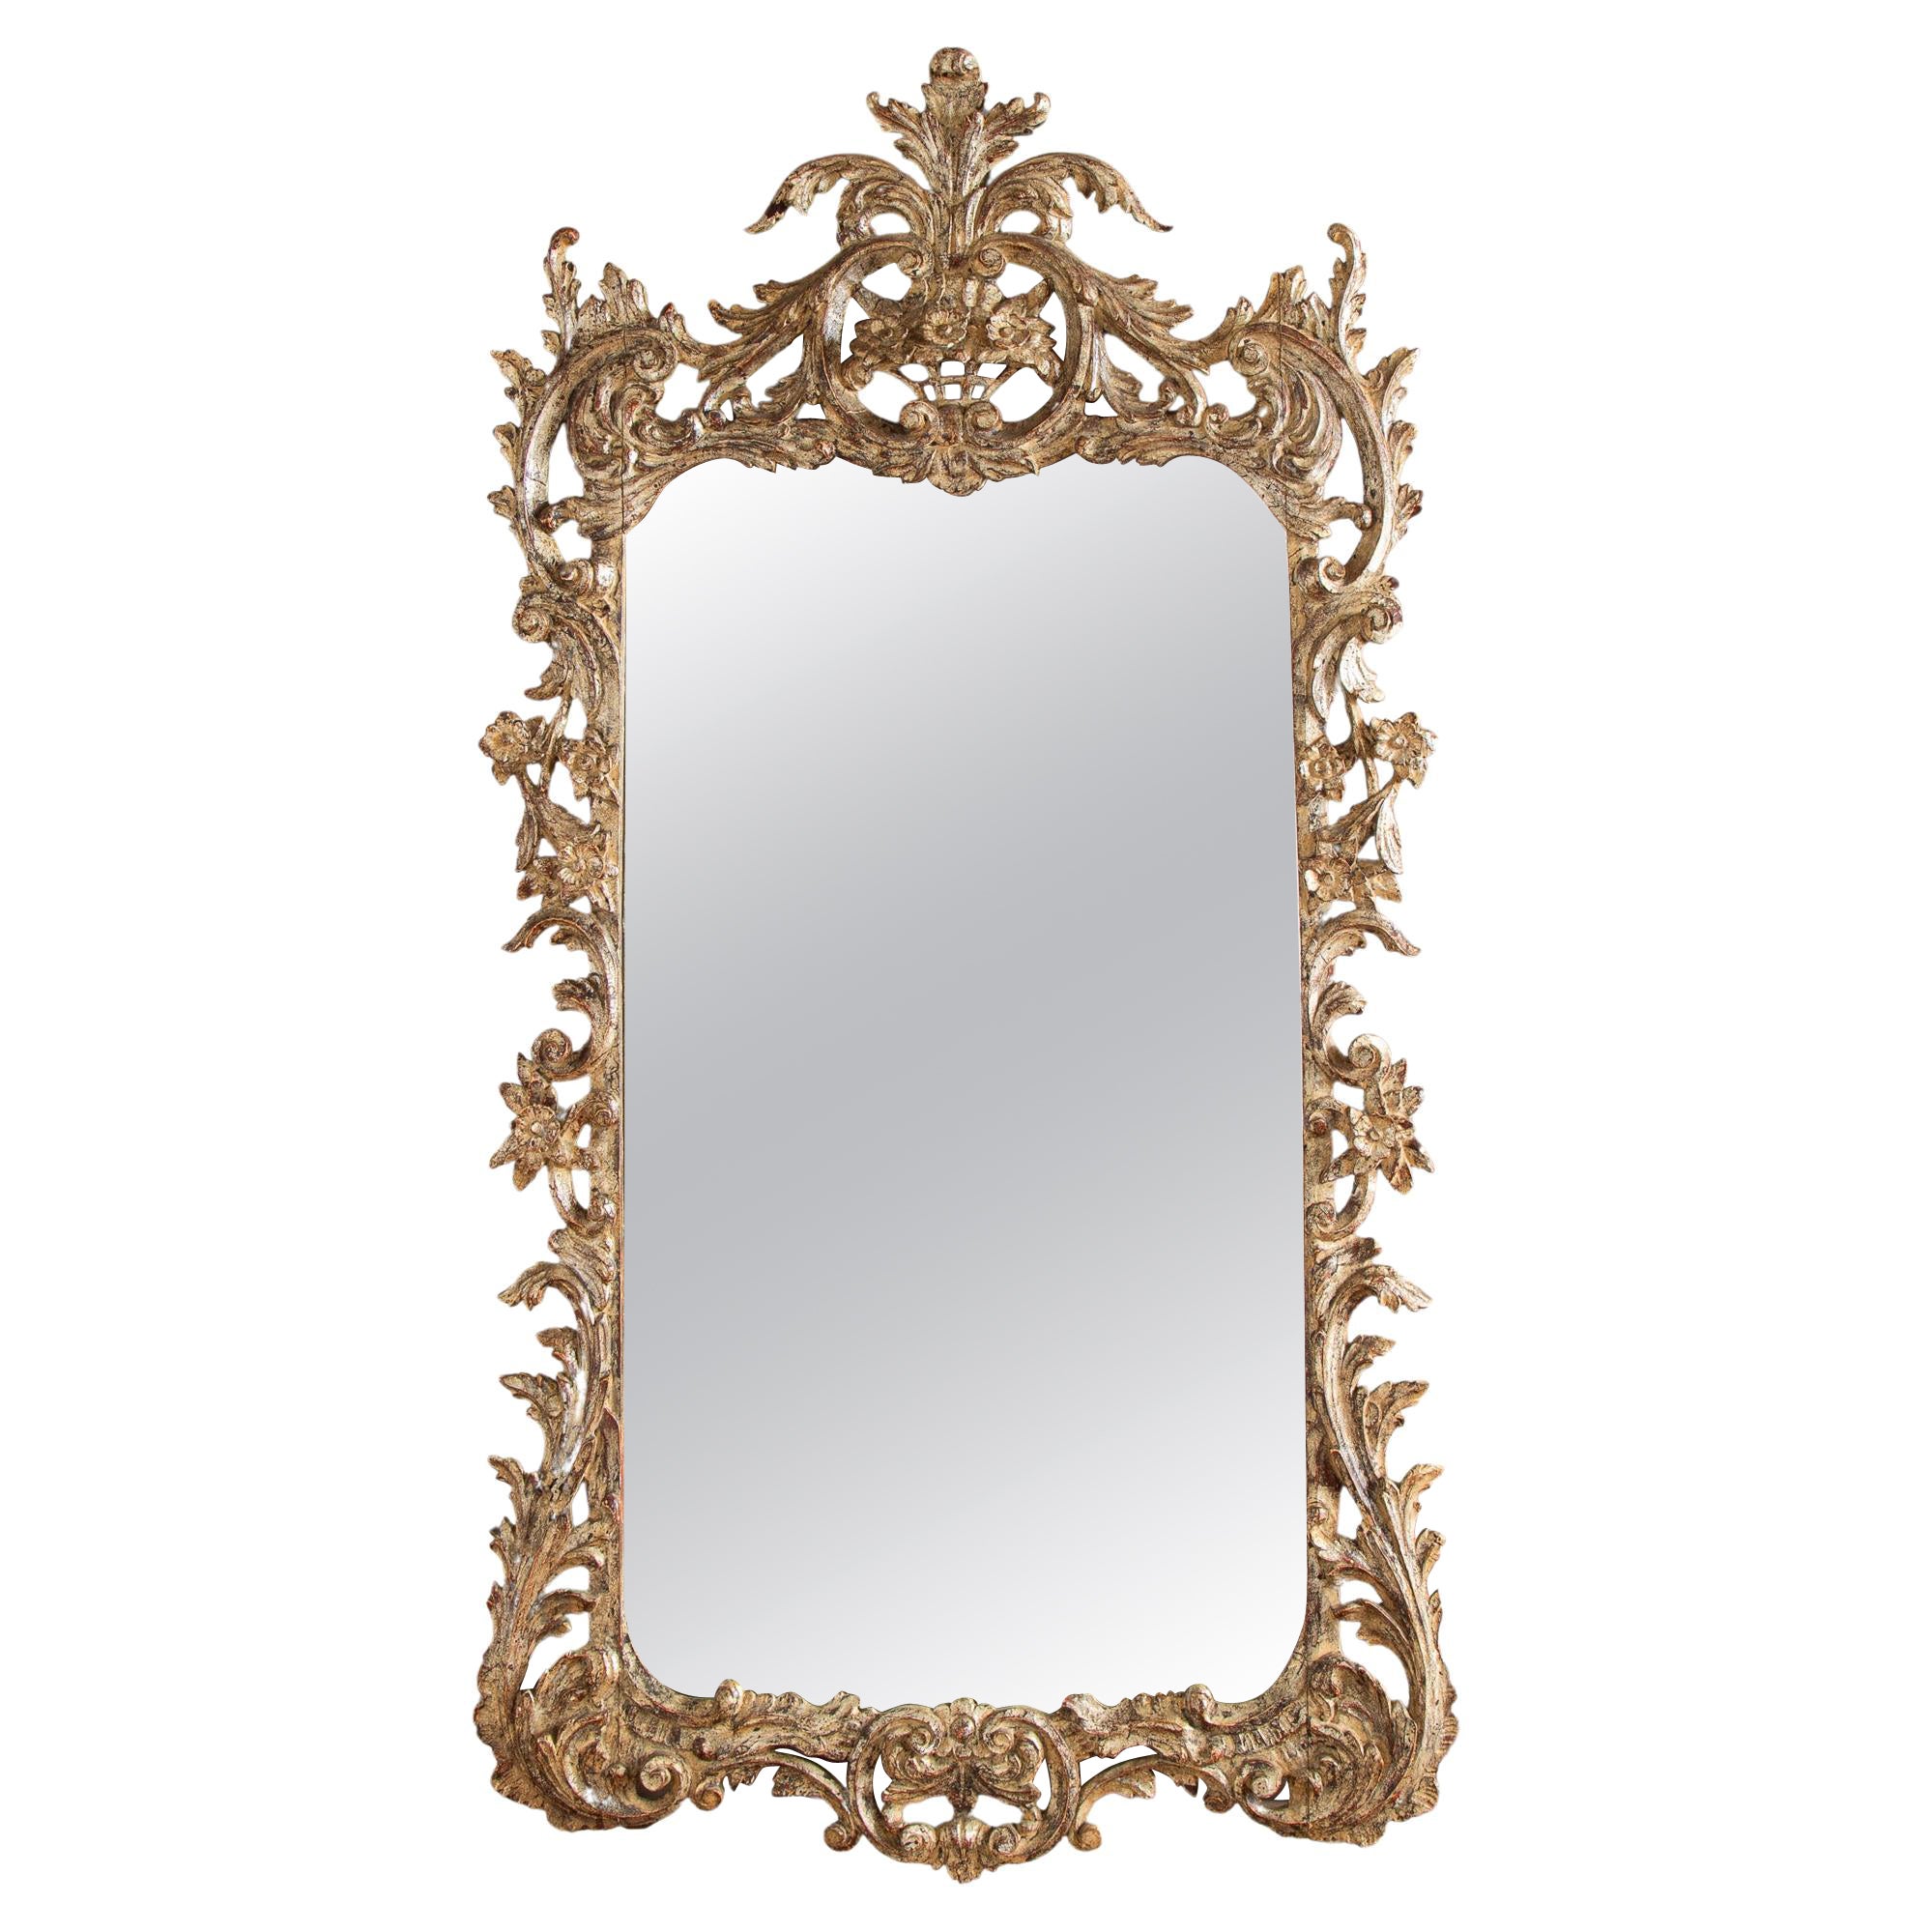 Early 1900’s Florentine rococo Style Silver Giltwood mirror For Sale